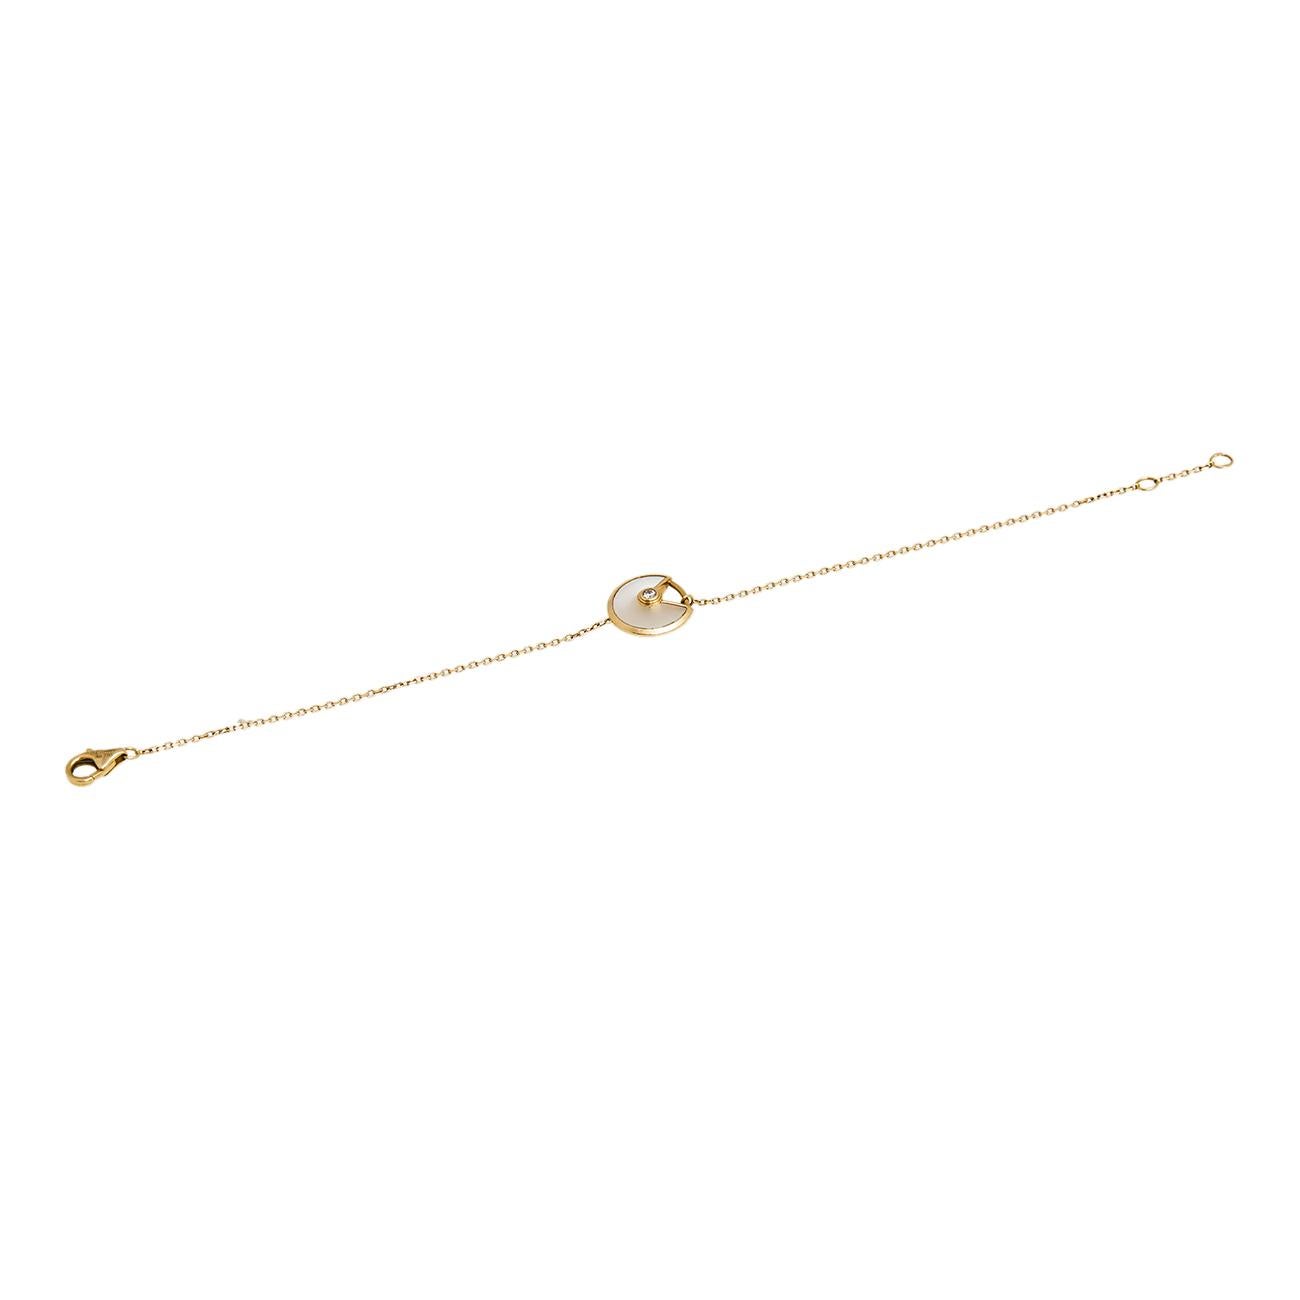 A magnificent offering from Cartier's Amulette de Cartier line. The bracelet comes crafted from 18k yellow gold and it has the signature motif in mother of pearl highlighted by a shimmering diamond. Smoothly finished, the desirable creation deserves